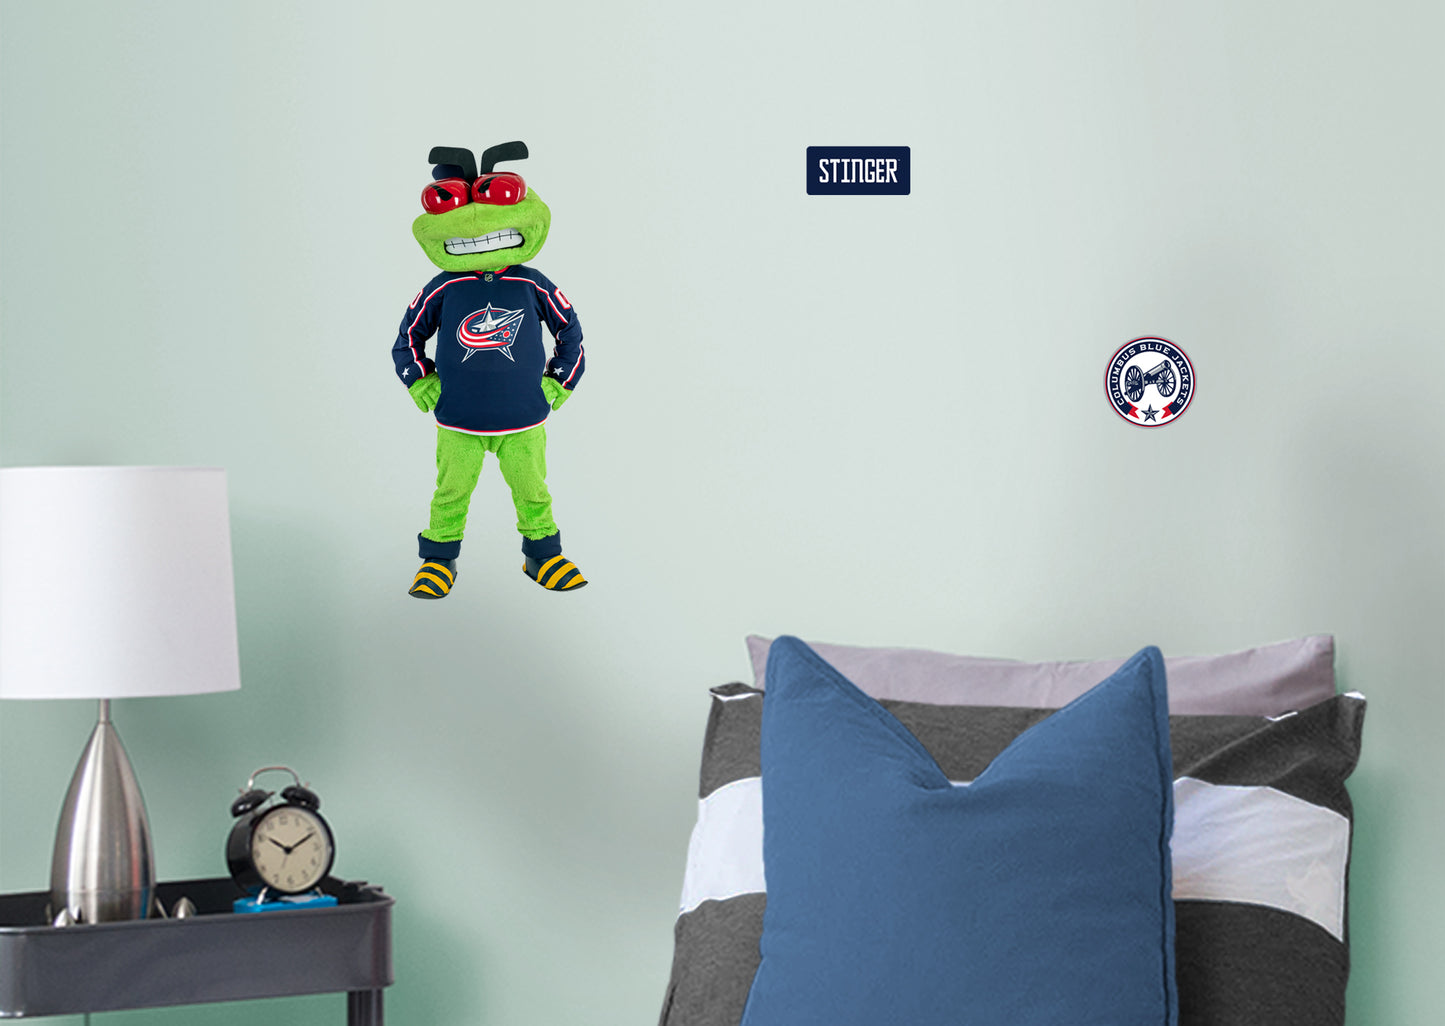 Columbus Blue Jackets: Stinger 2021 Mascot        - Officially Licensed NHL Removable Wall   Adhesive Decal